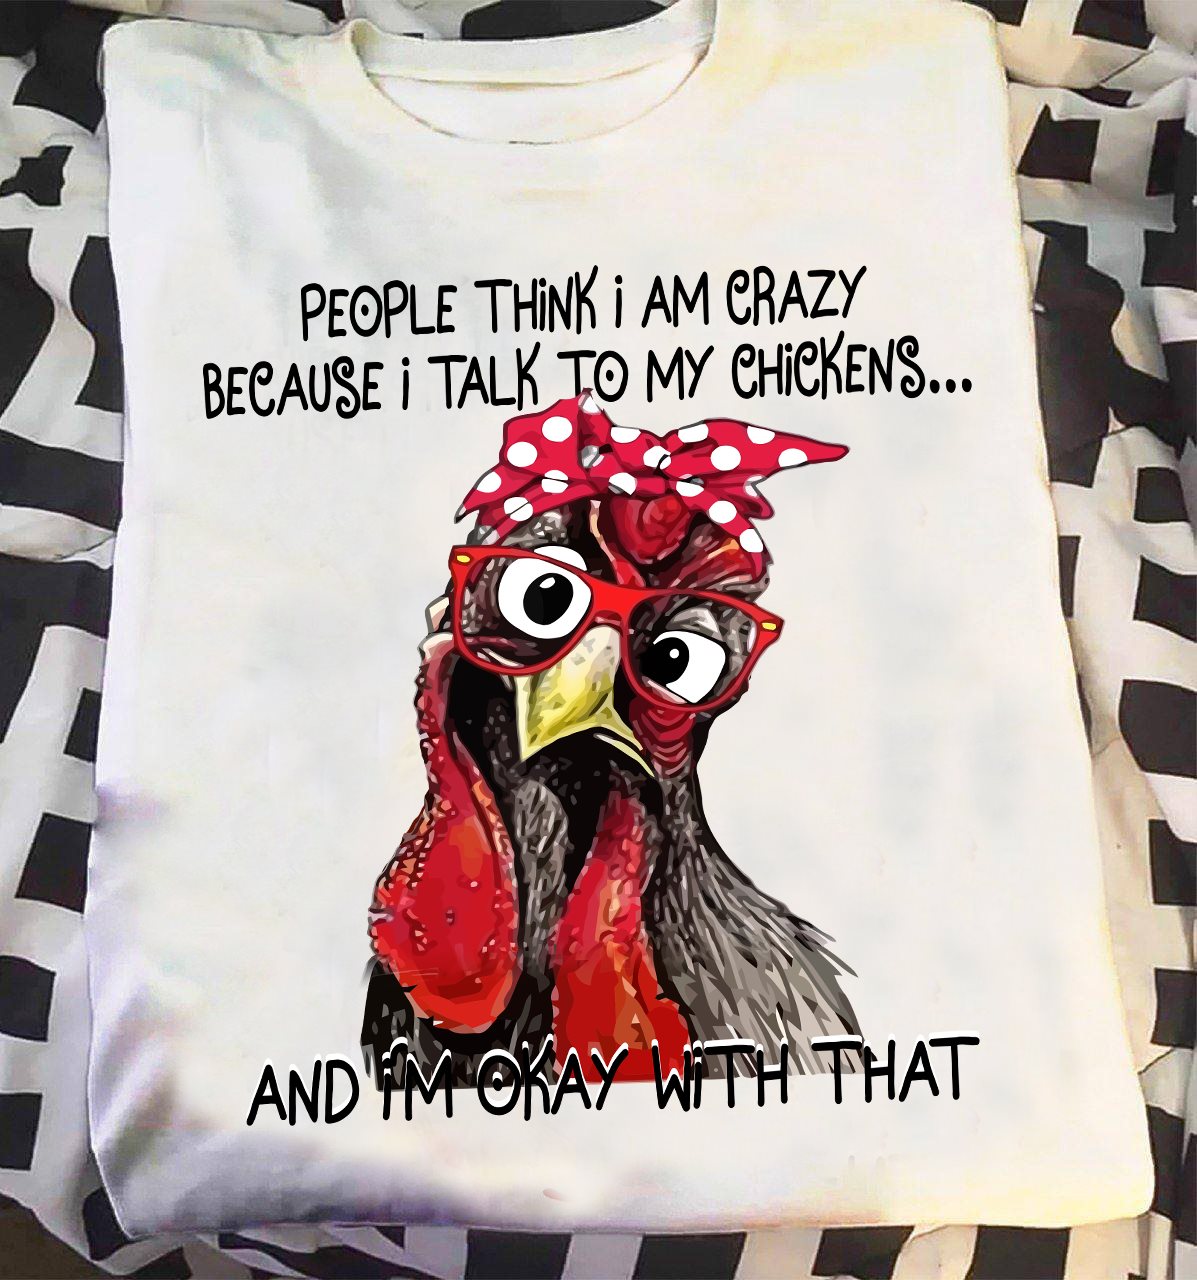 People think I am crazy because I talk to my chickens and I'm okay with that